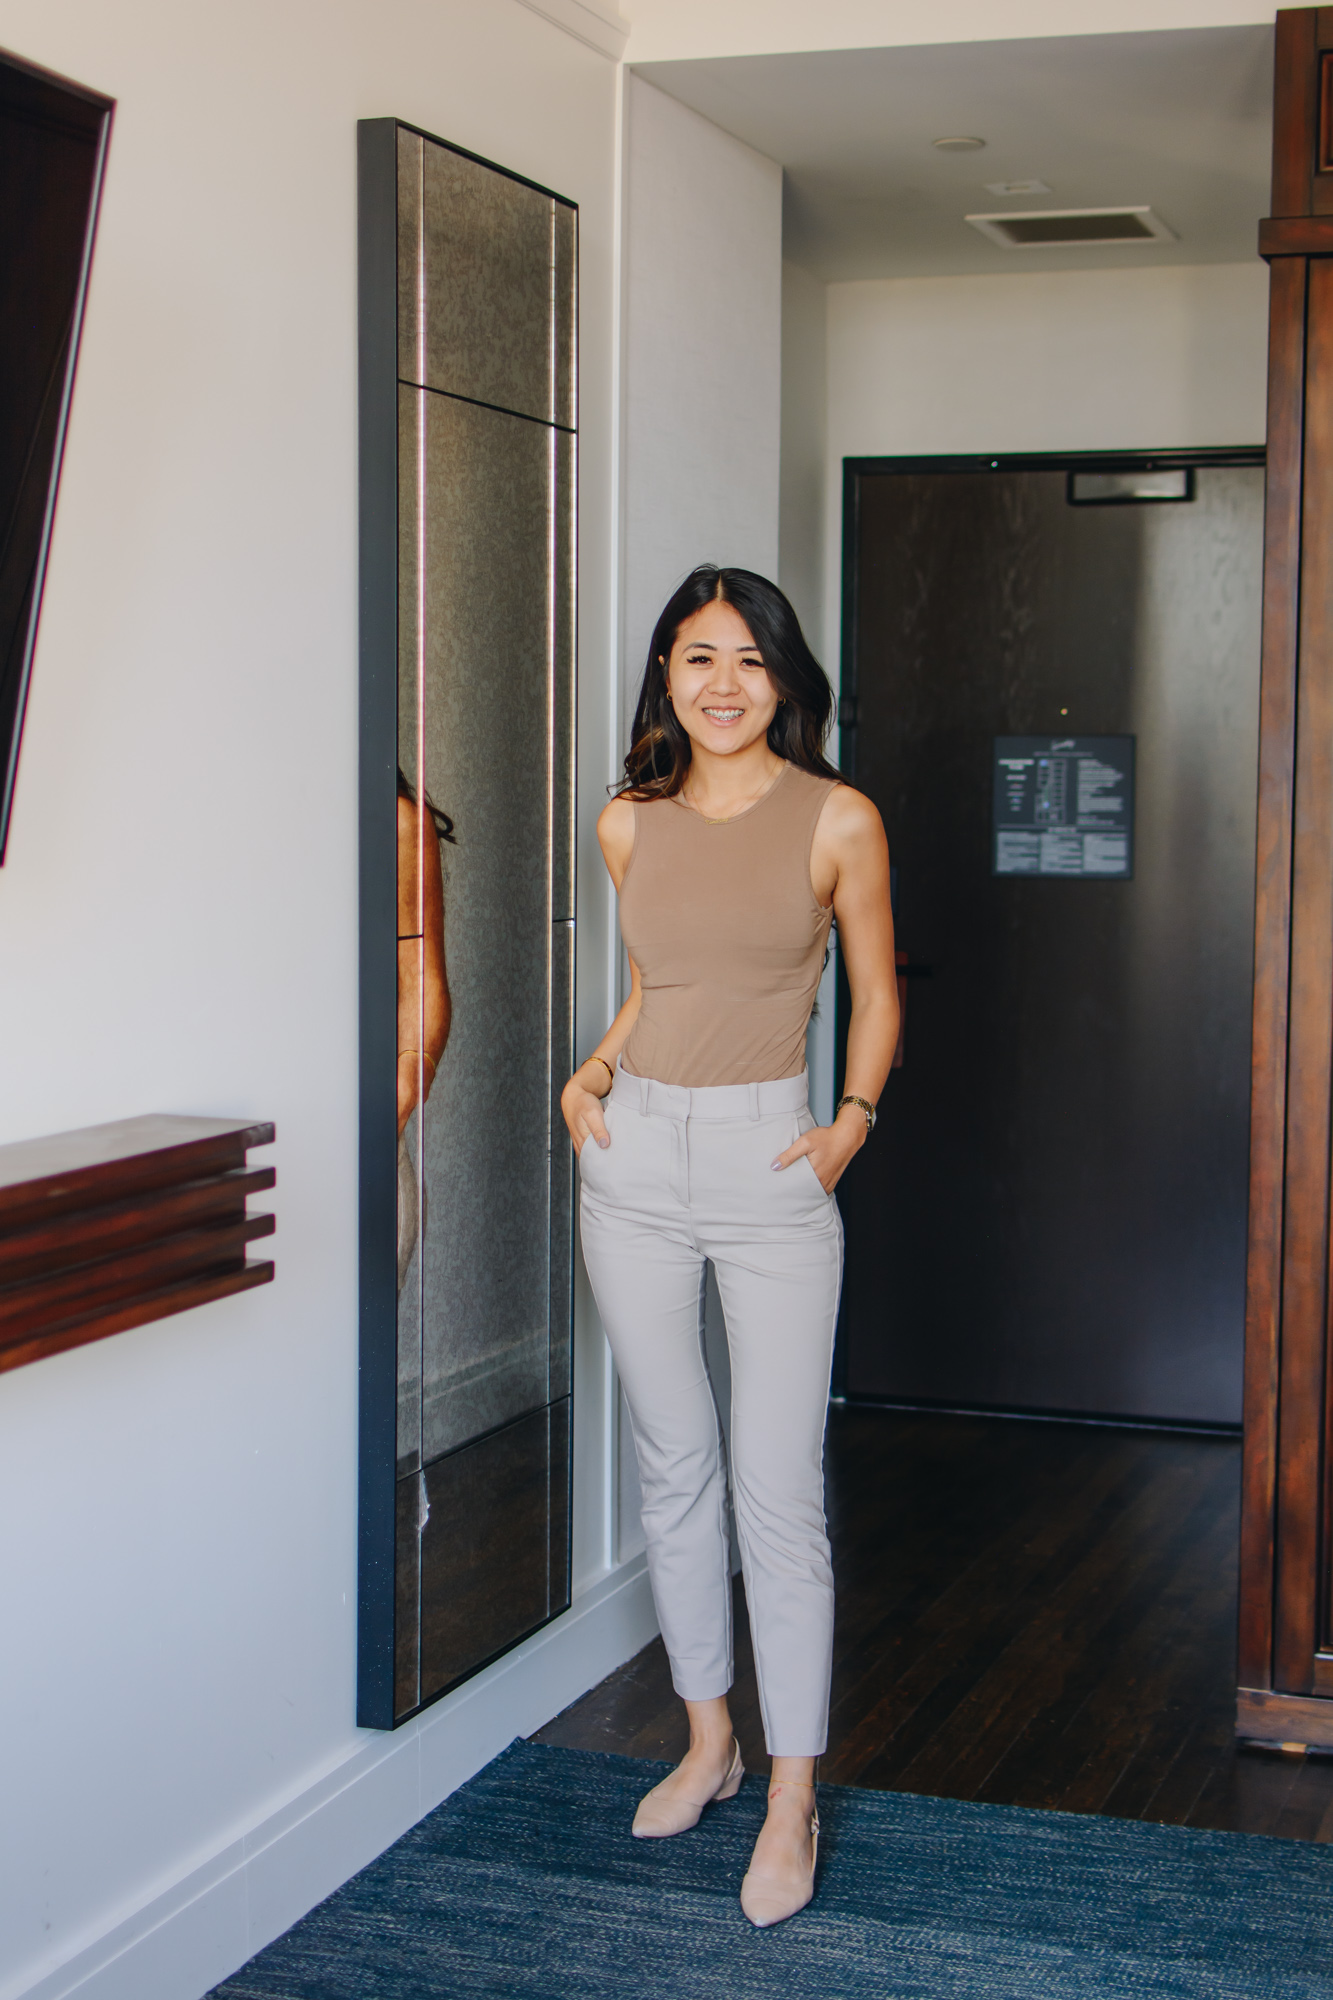 Lifestyle blogger Demi Bang shares what she wore to a marketing conference for account service.